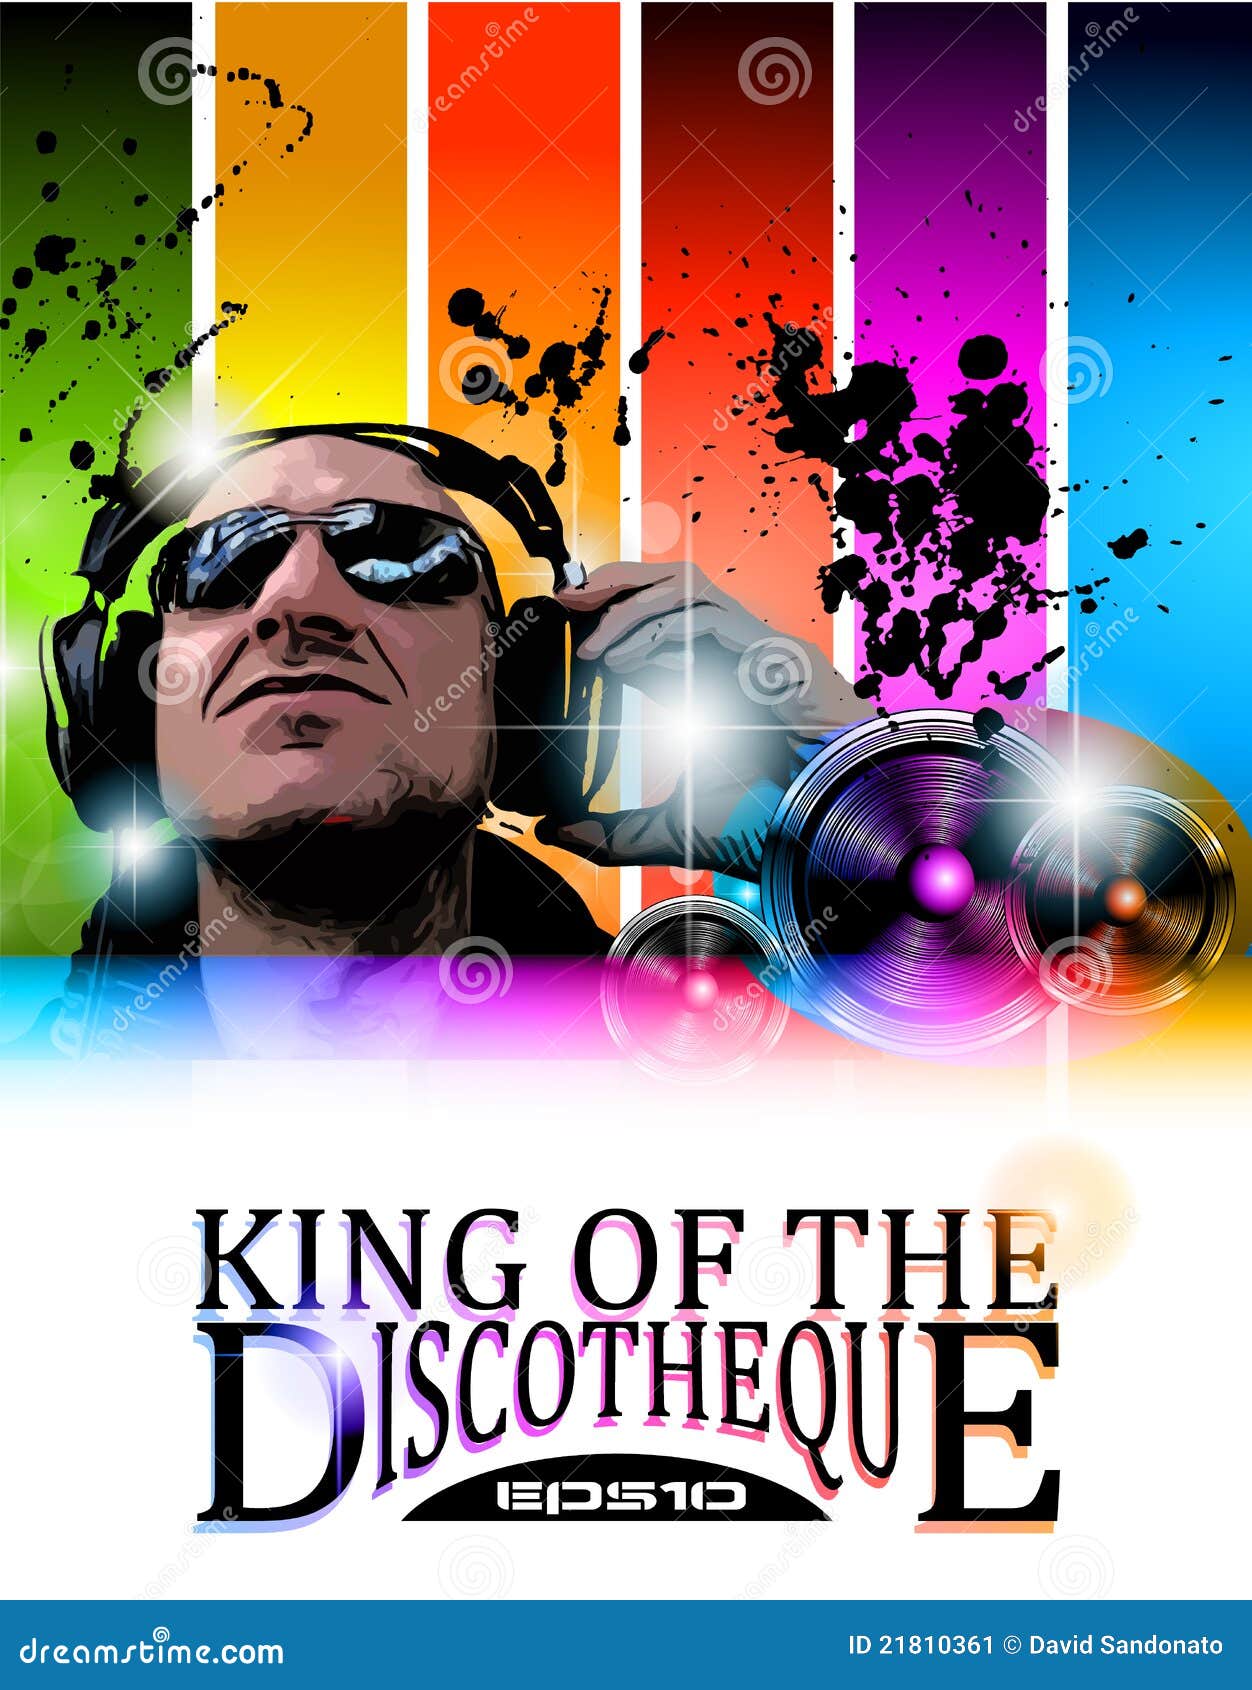 king of the discotheque flyer